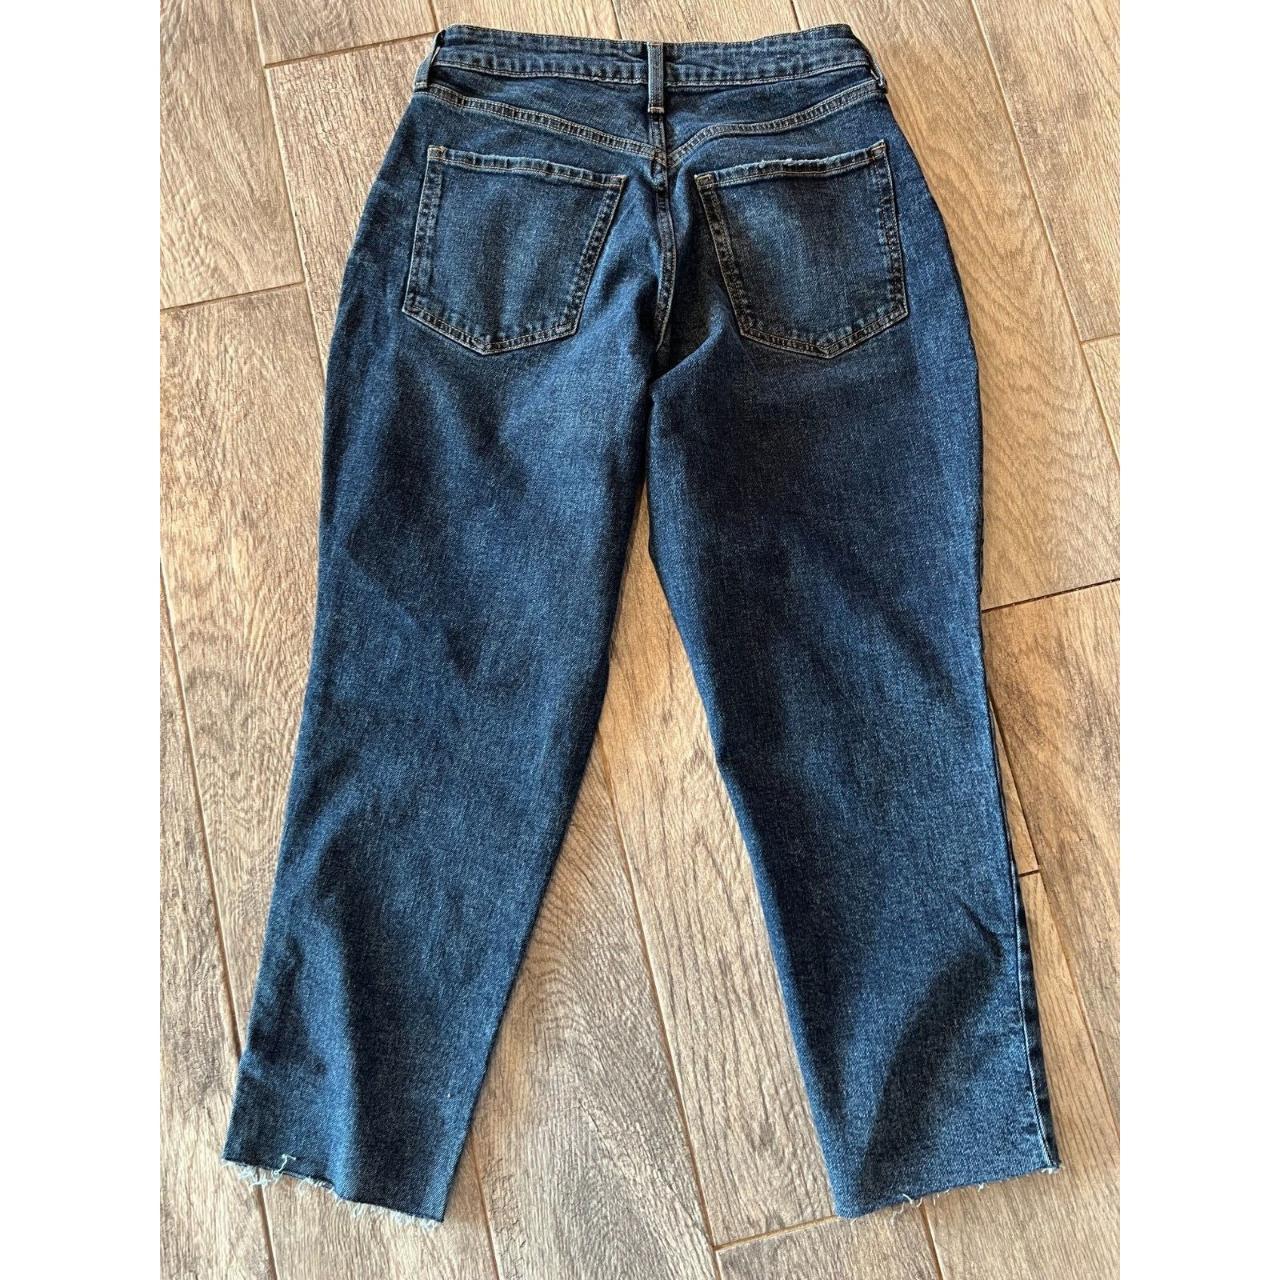 High-Waisted Slouchy Straight Jeans for Girls